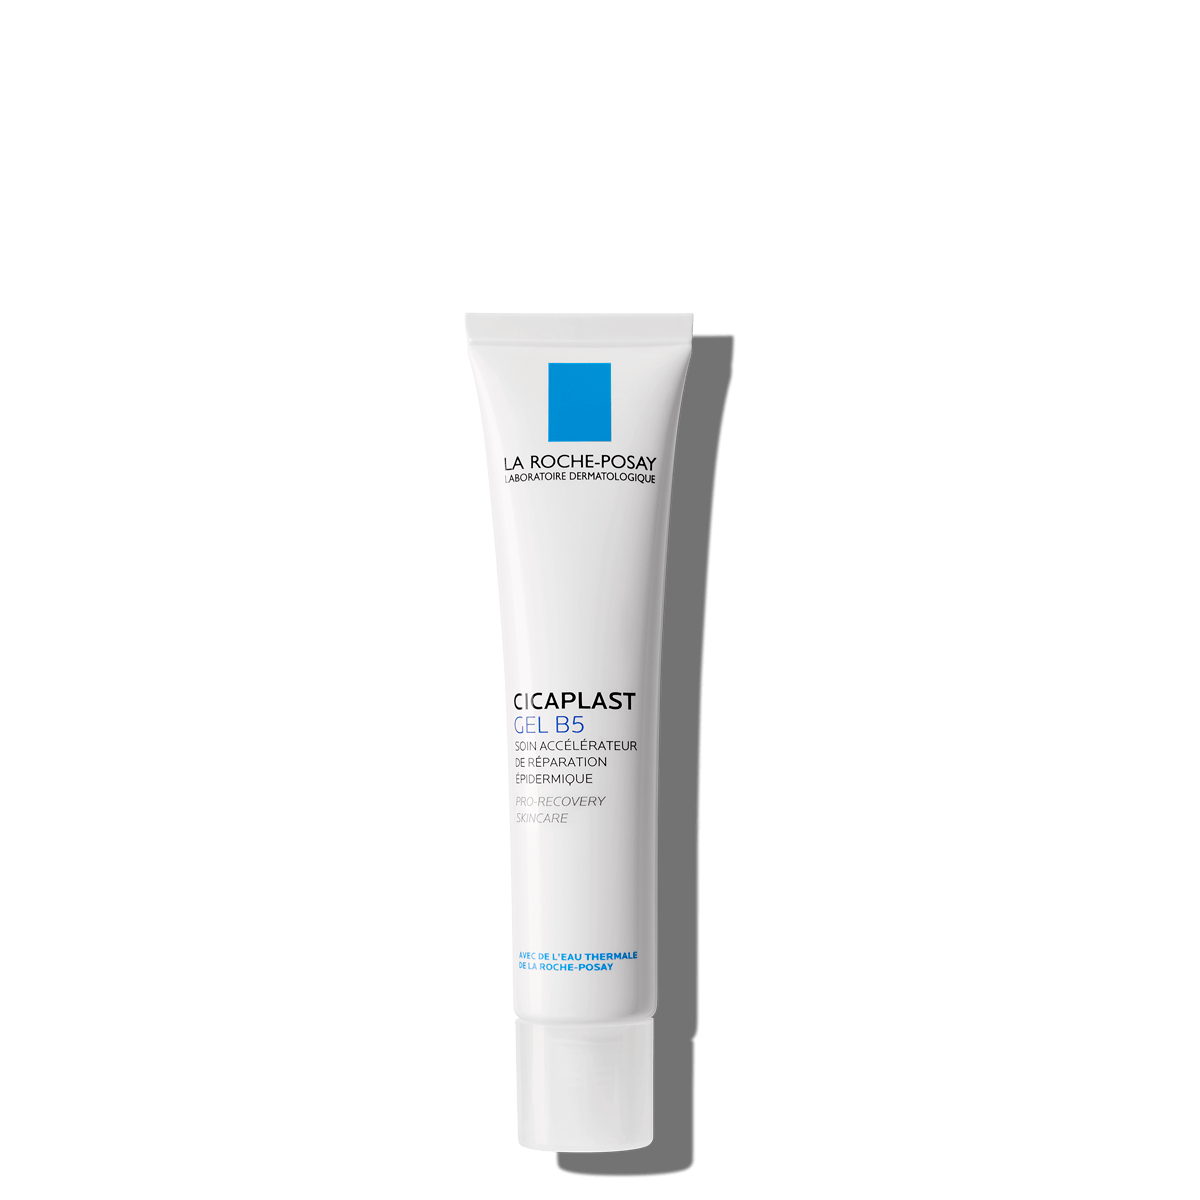 La Roche Posay ProductPage Damaged Cicaplast Gel B5 Pro Recovery 40ml 